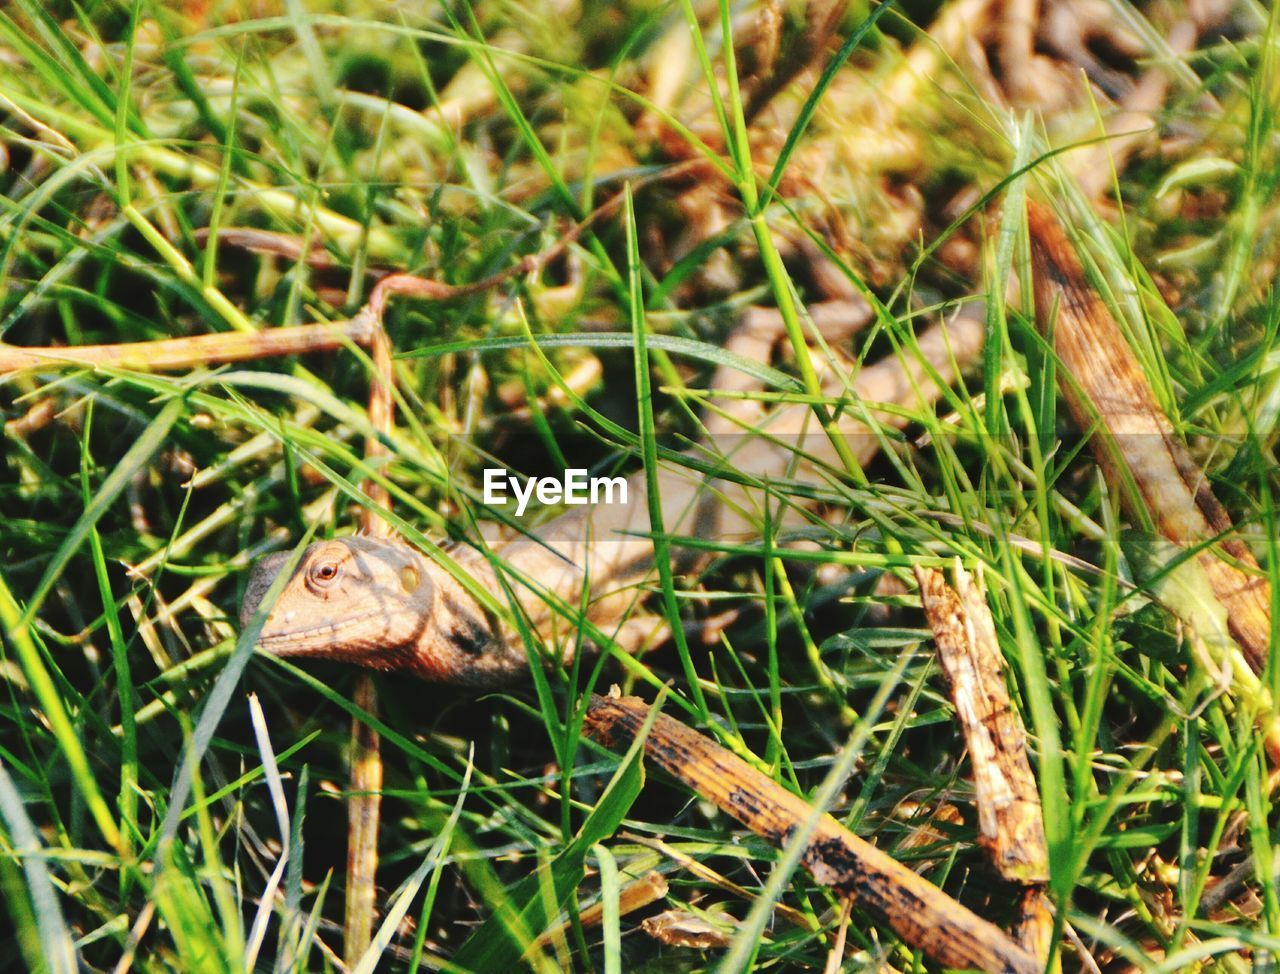 CLOSE-UP OF SNAKE ON FIELD